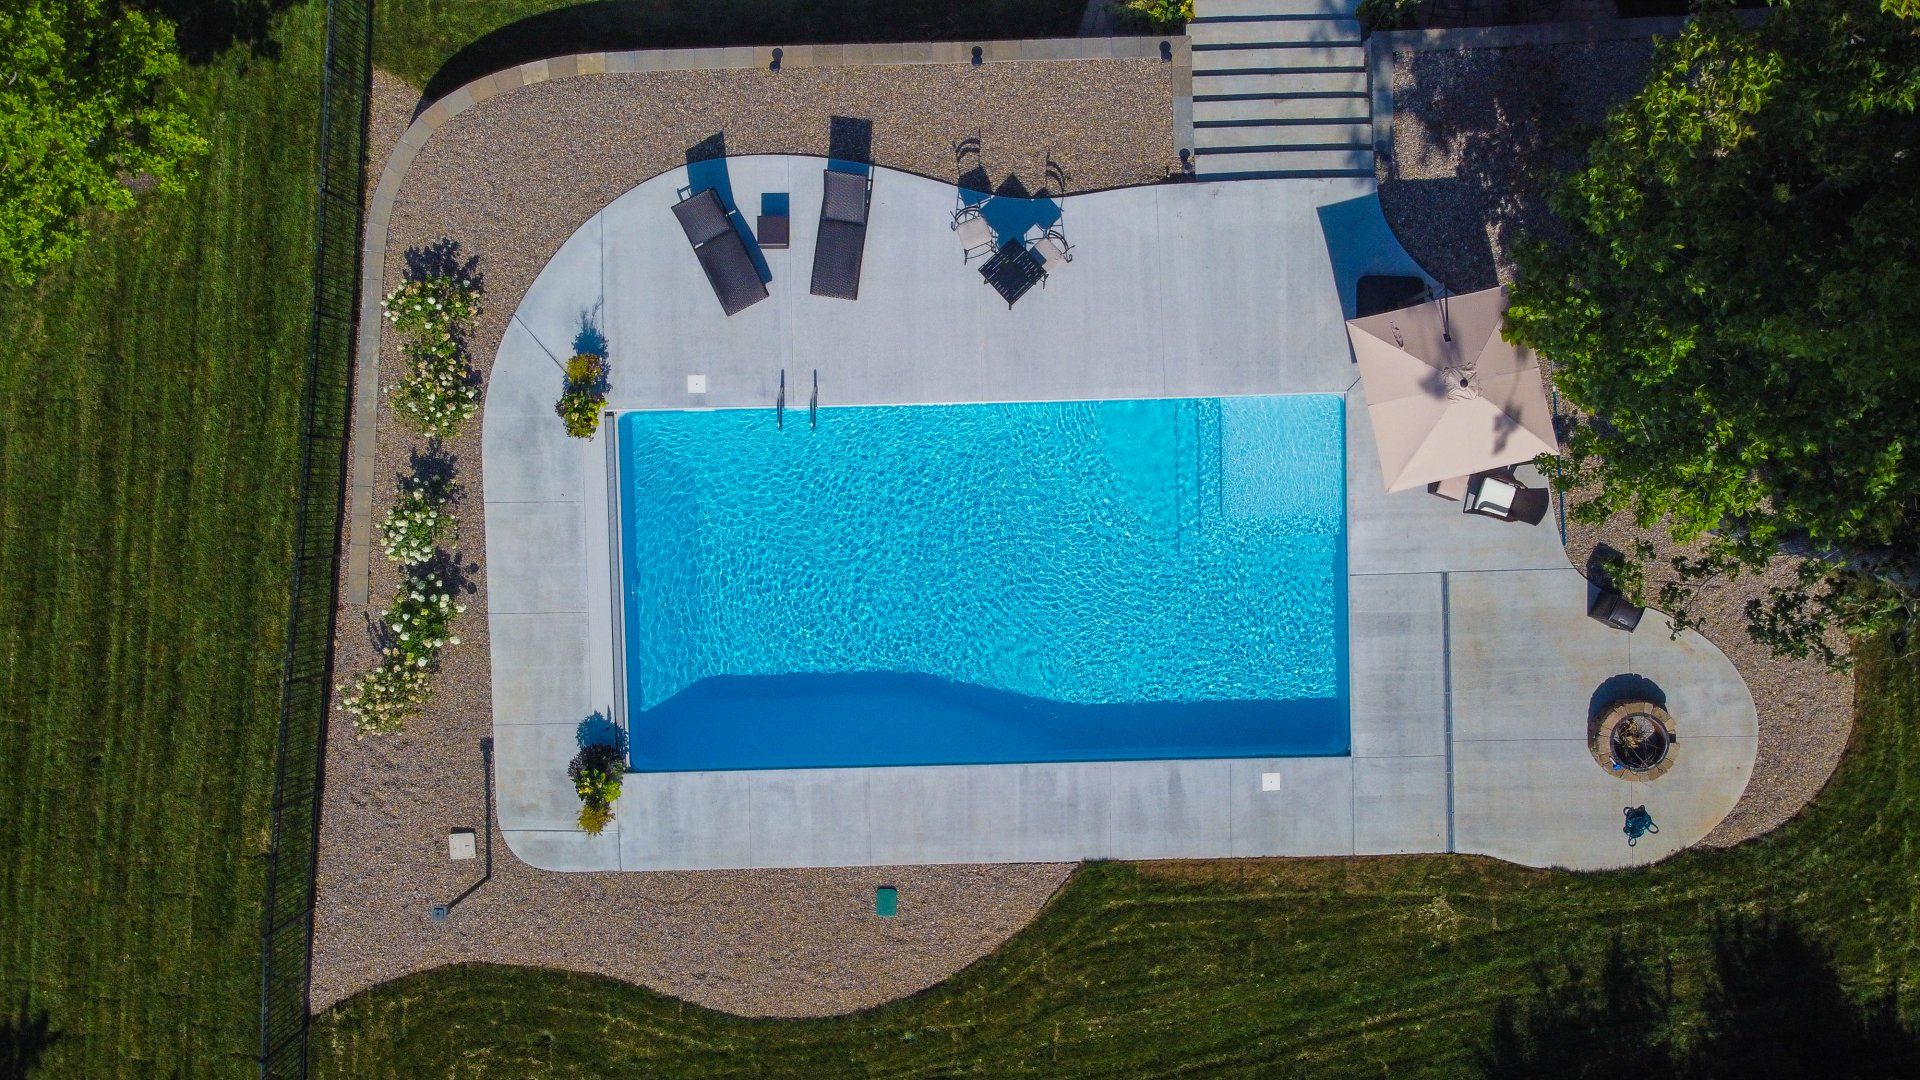 Modern Pool Decking Keeps Your Ingorund Pool Looking Great & Your Guests Safe in Columbia, MO.